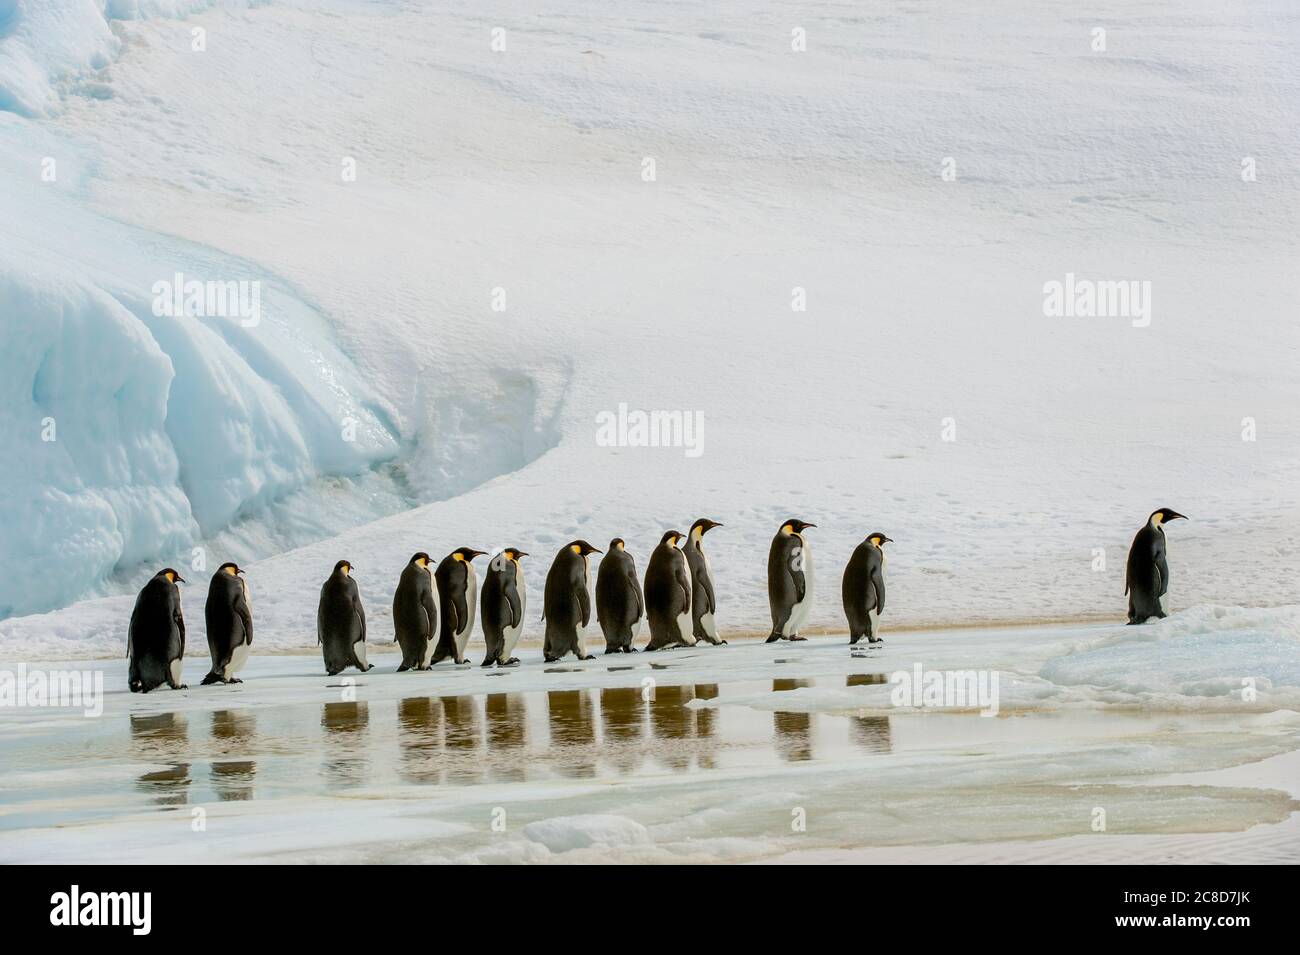 A group of Emperor penguins (Aptenodytes forsteri) walking over fast ice at the Emperor penguin colony at Snow Hill Island in the Weddell Sea in Antar Stock Photo